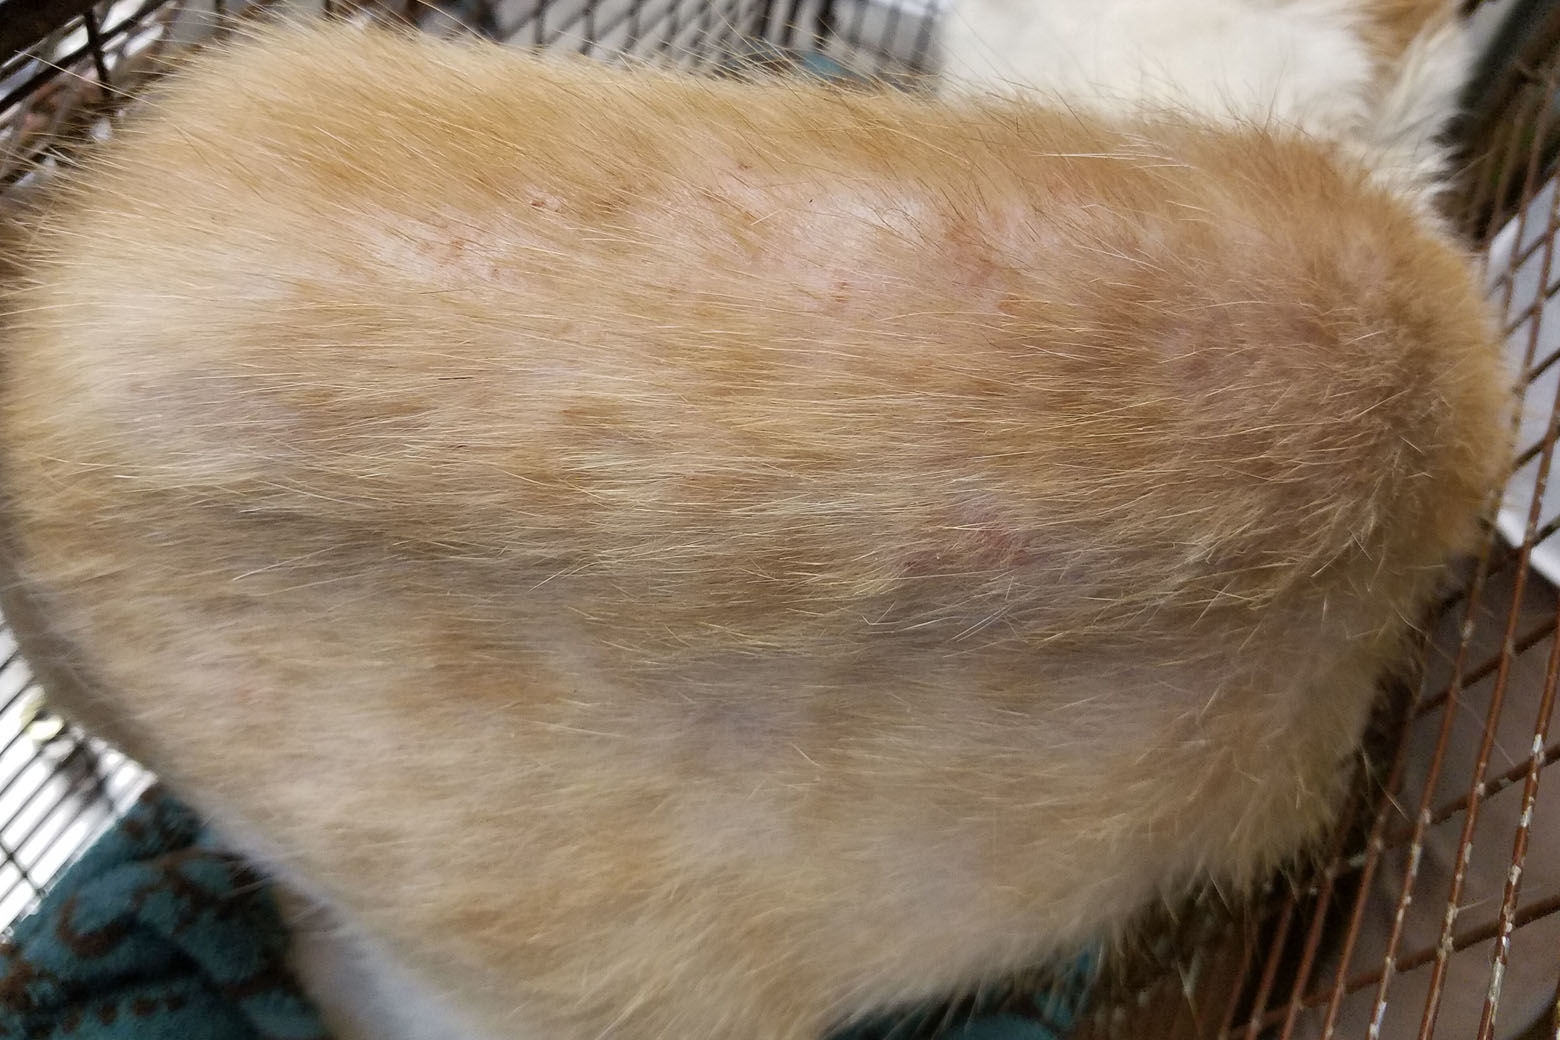 Several of the cats have been adopted and are doing better. This photos show a skin condition on cat named Daffodil. (Courtesy Humane Rescue Alliance)